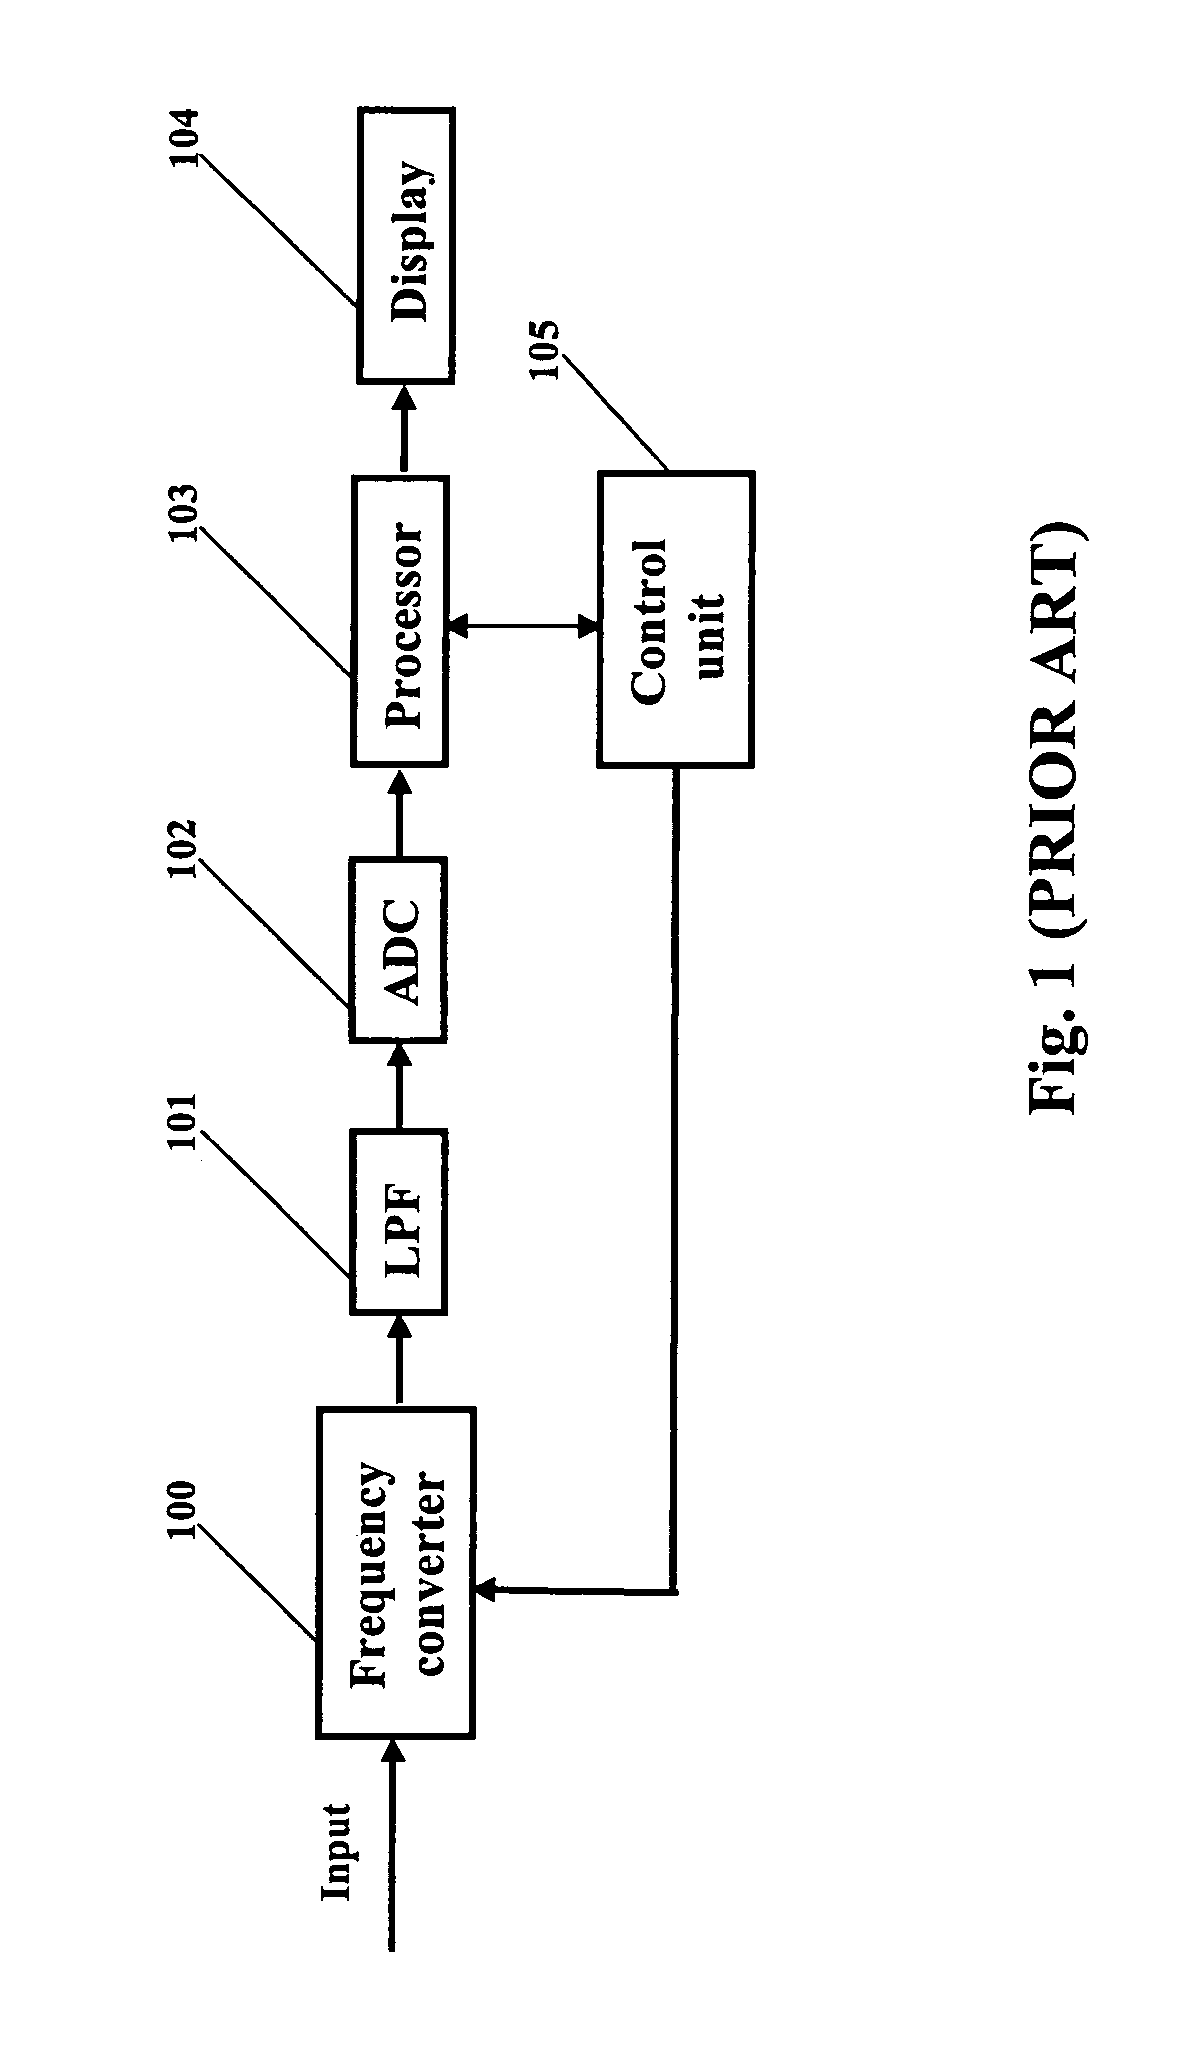 Spectrum analyzer with phase noise compensation